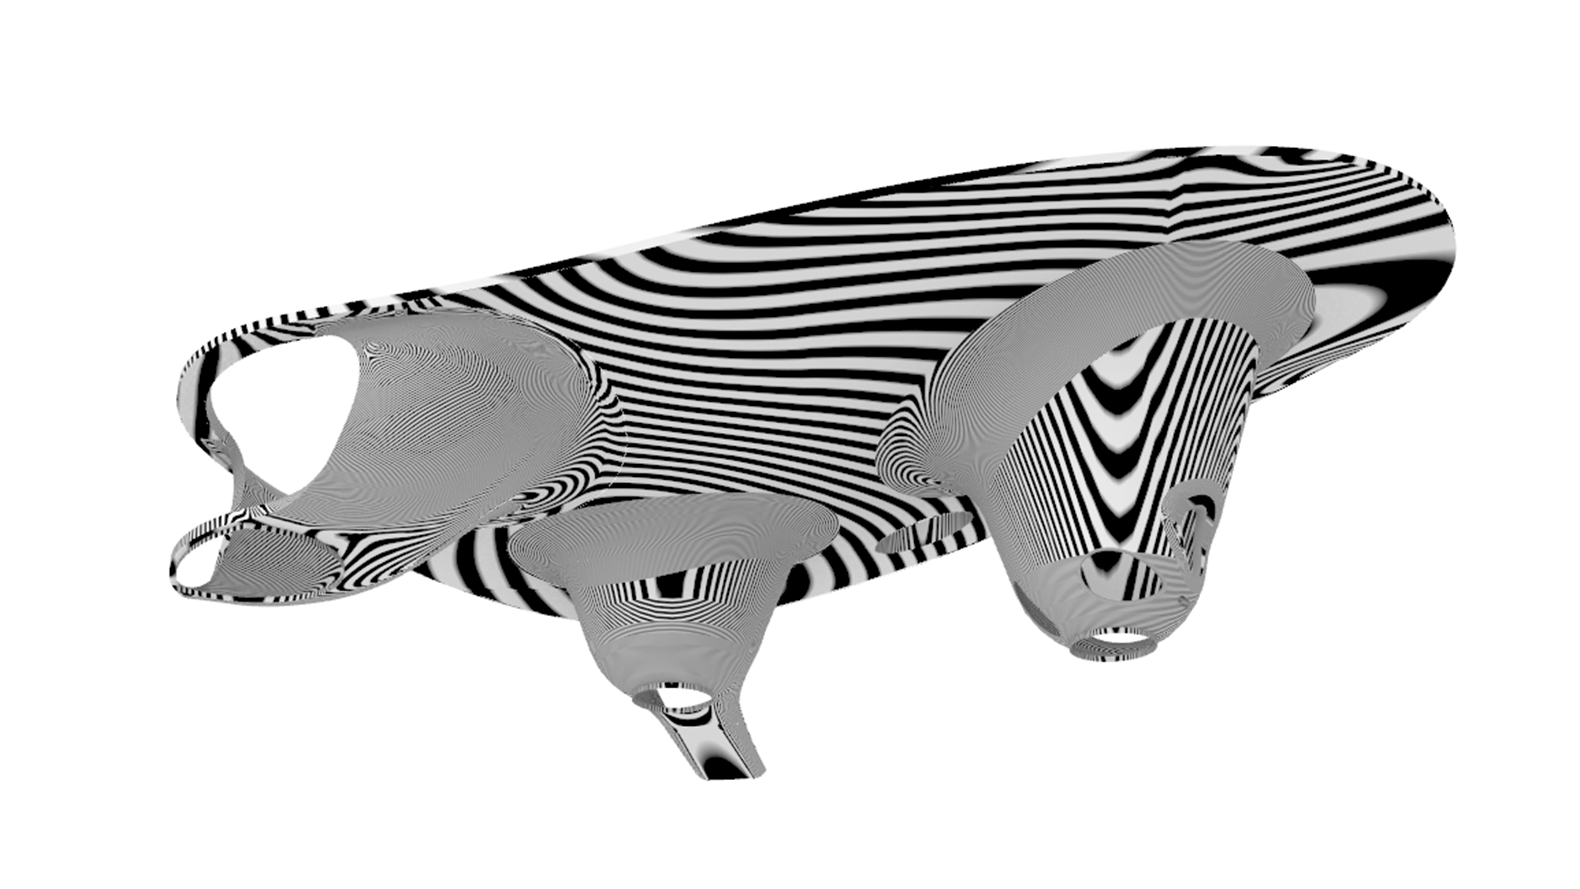 The Zebra visually evaluates surface smoothness and continuity.